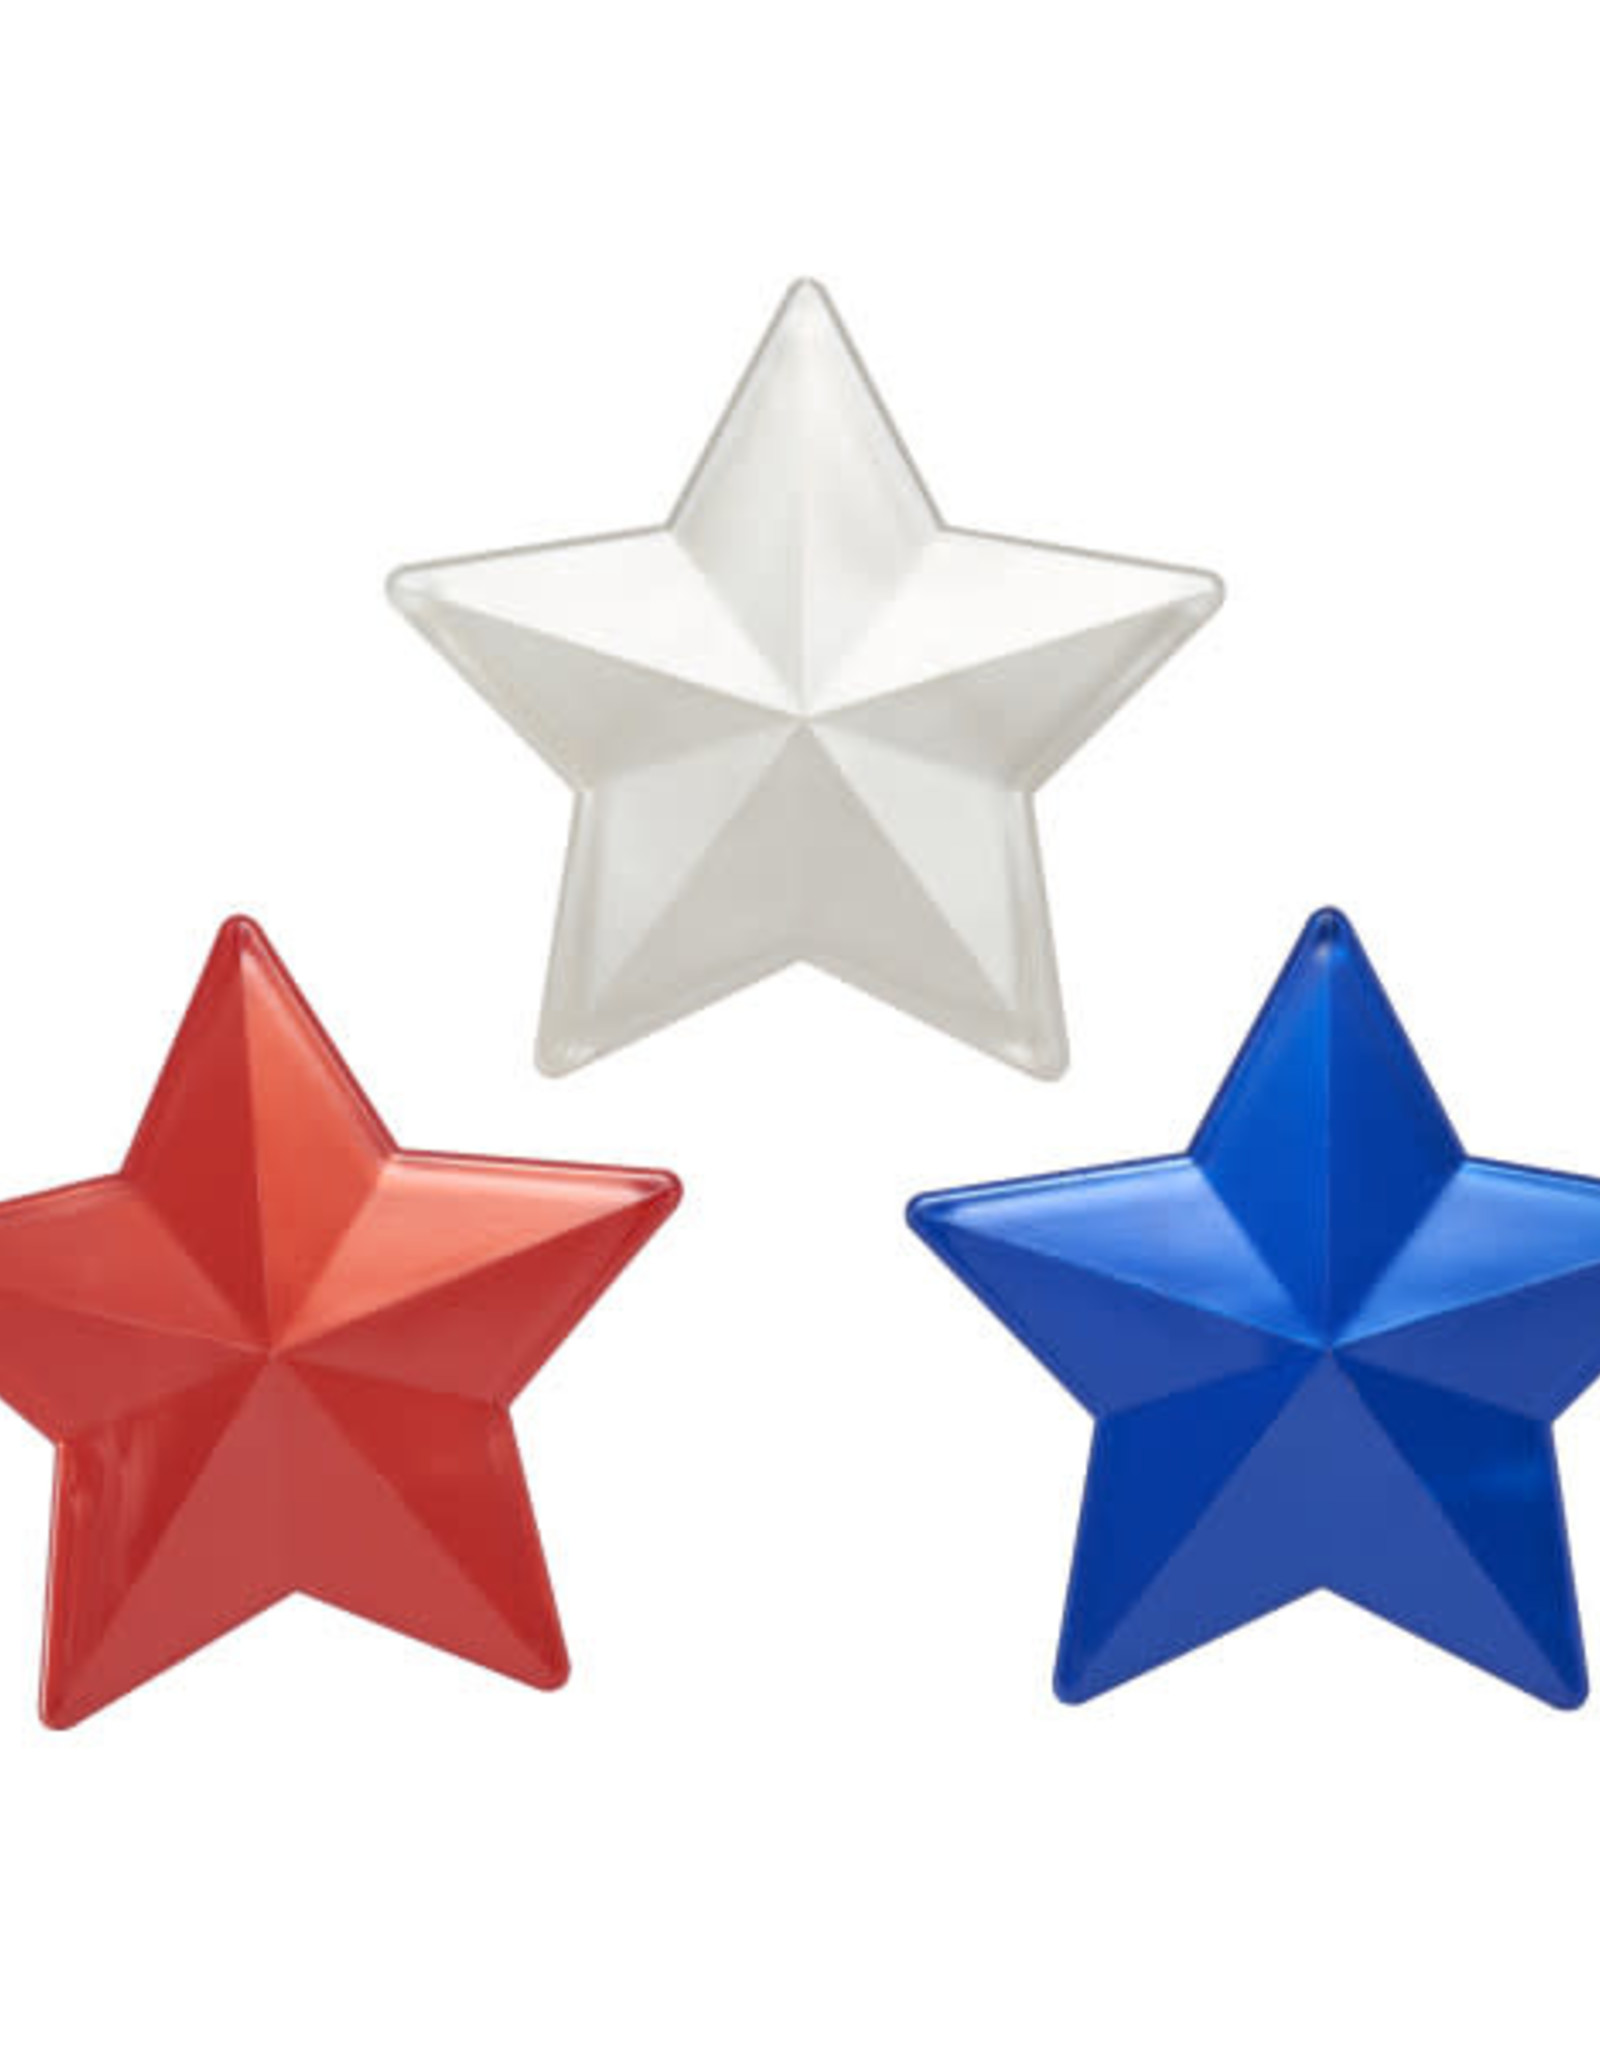 Star Adornment Layon(red, white, or blue)